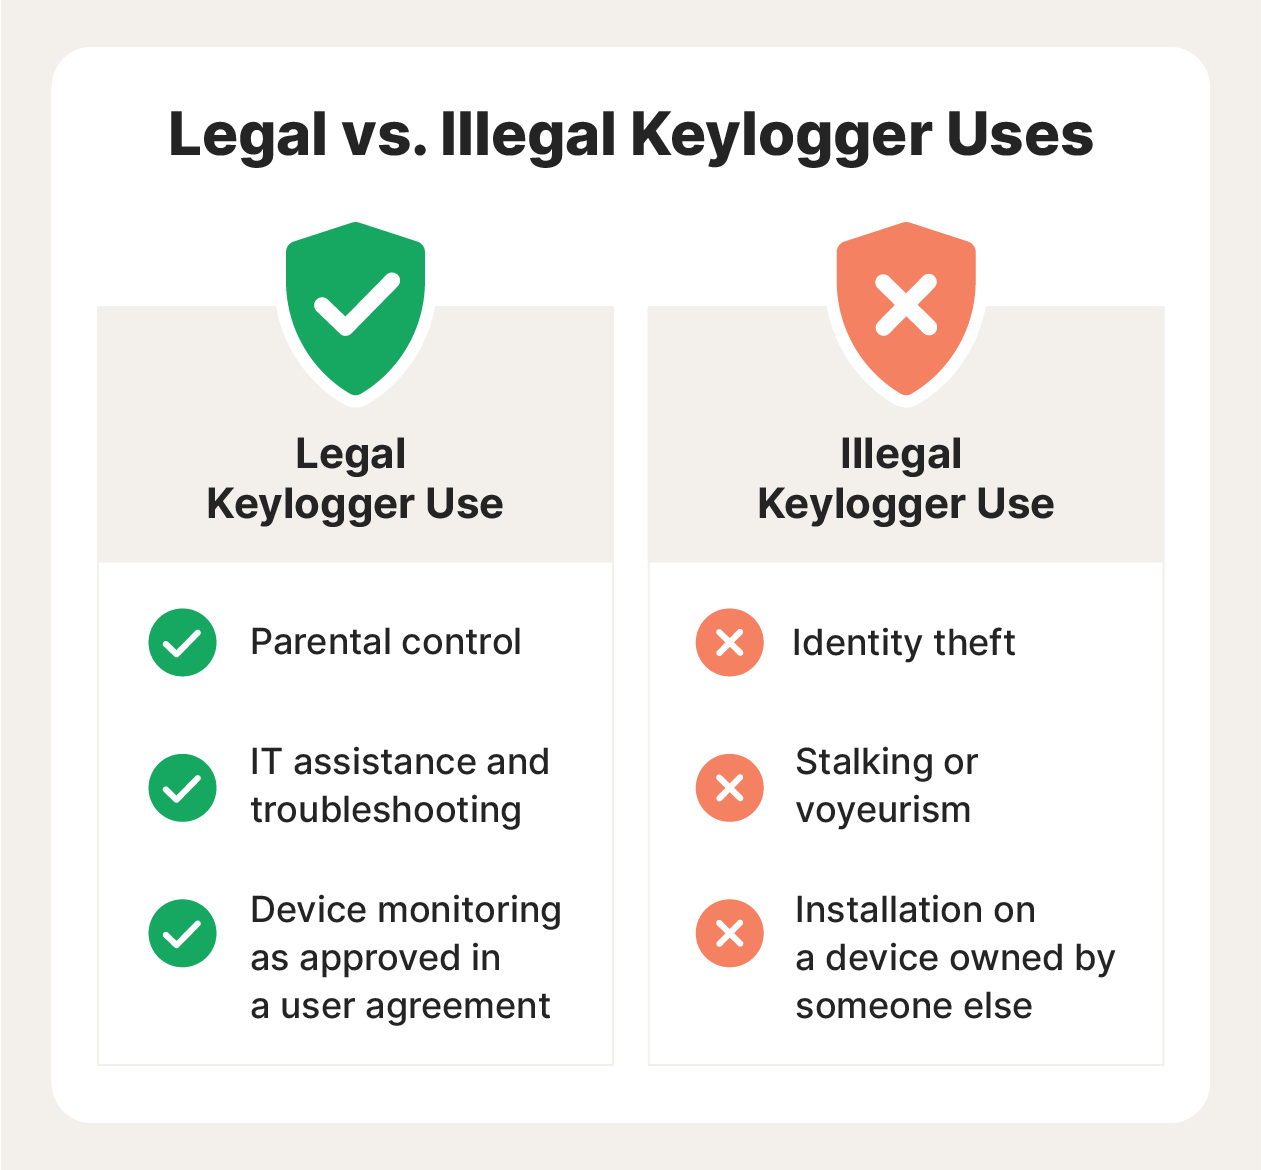 A graphic highlights both legal and illegal uses of keylogging, further answering the question, “What is a keylogger?